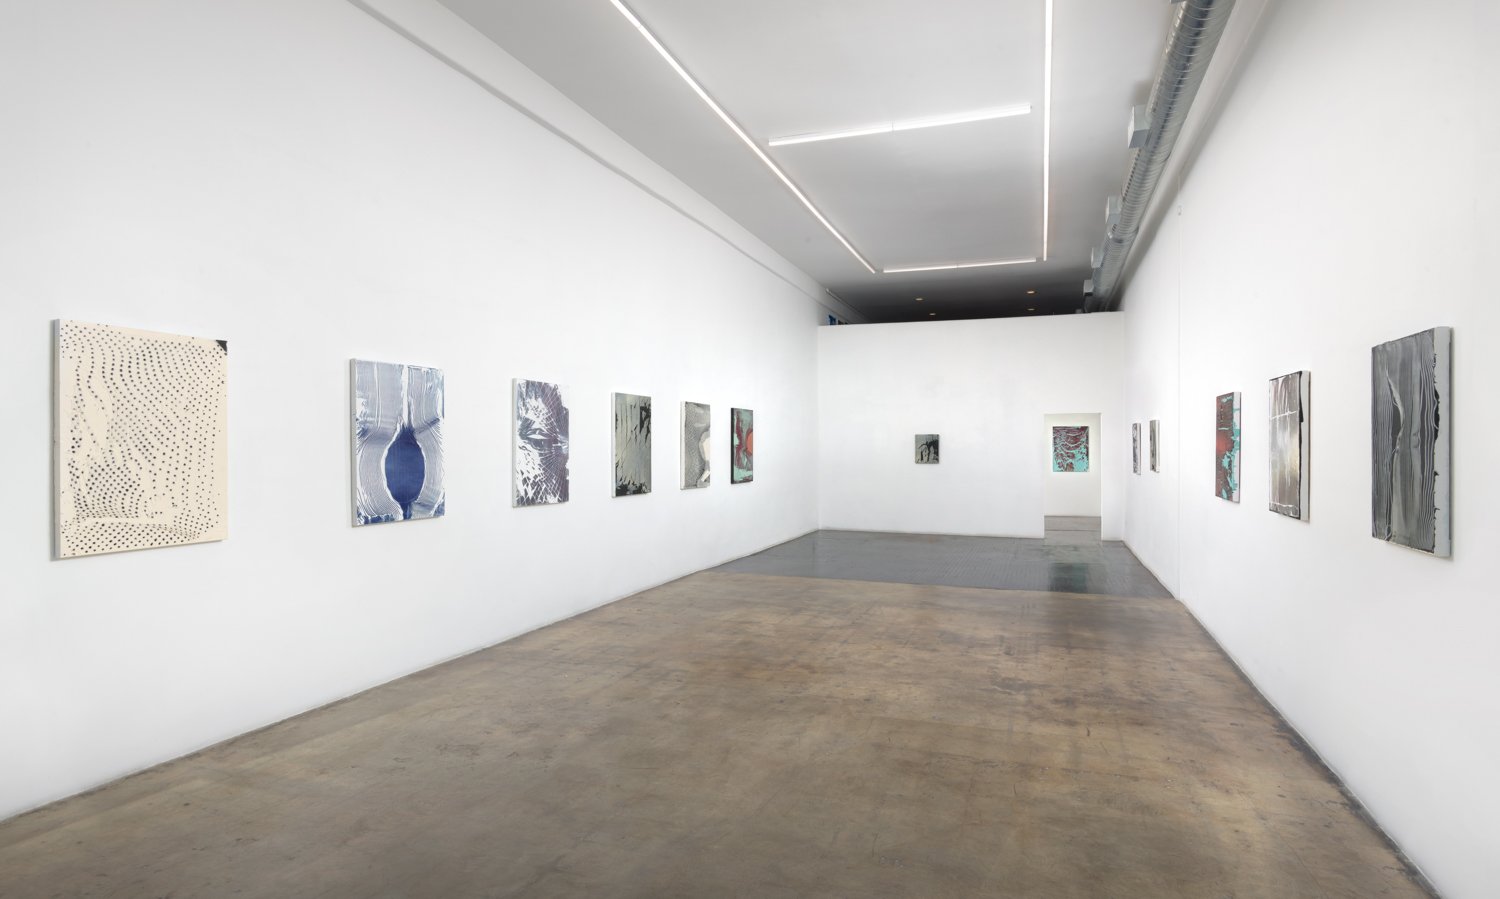  Installation views, Floating Windows, AF Projects, Los Angeles, 2022, photo: Robert Wedemeyer   